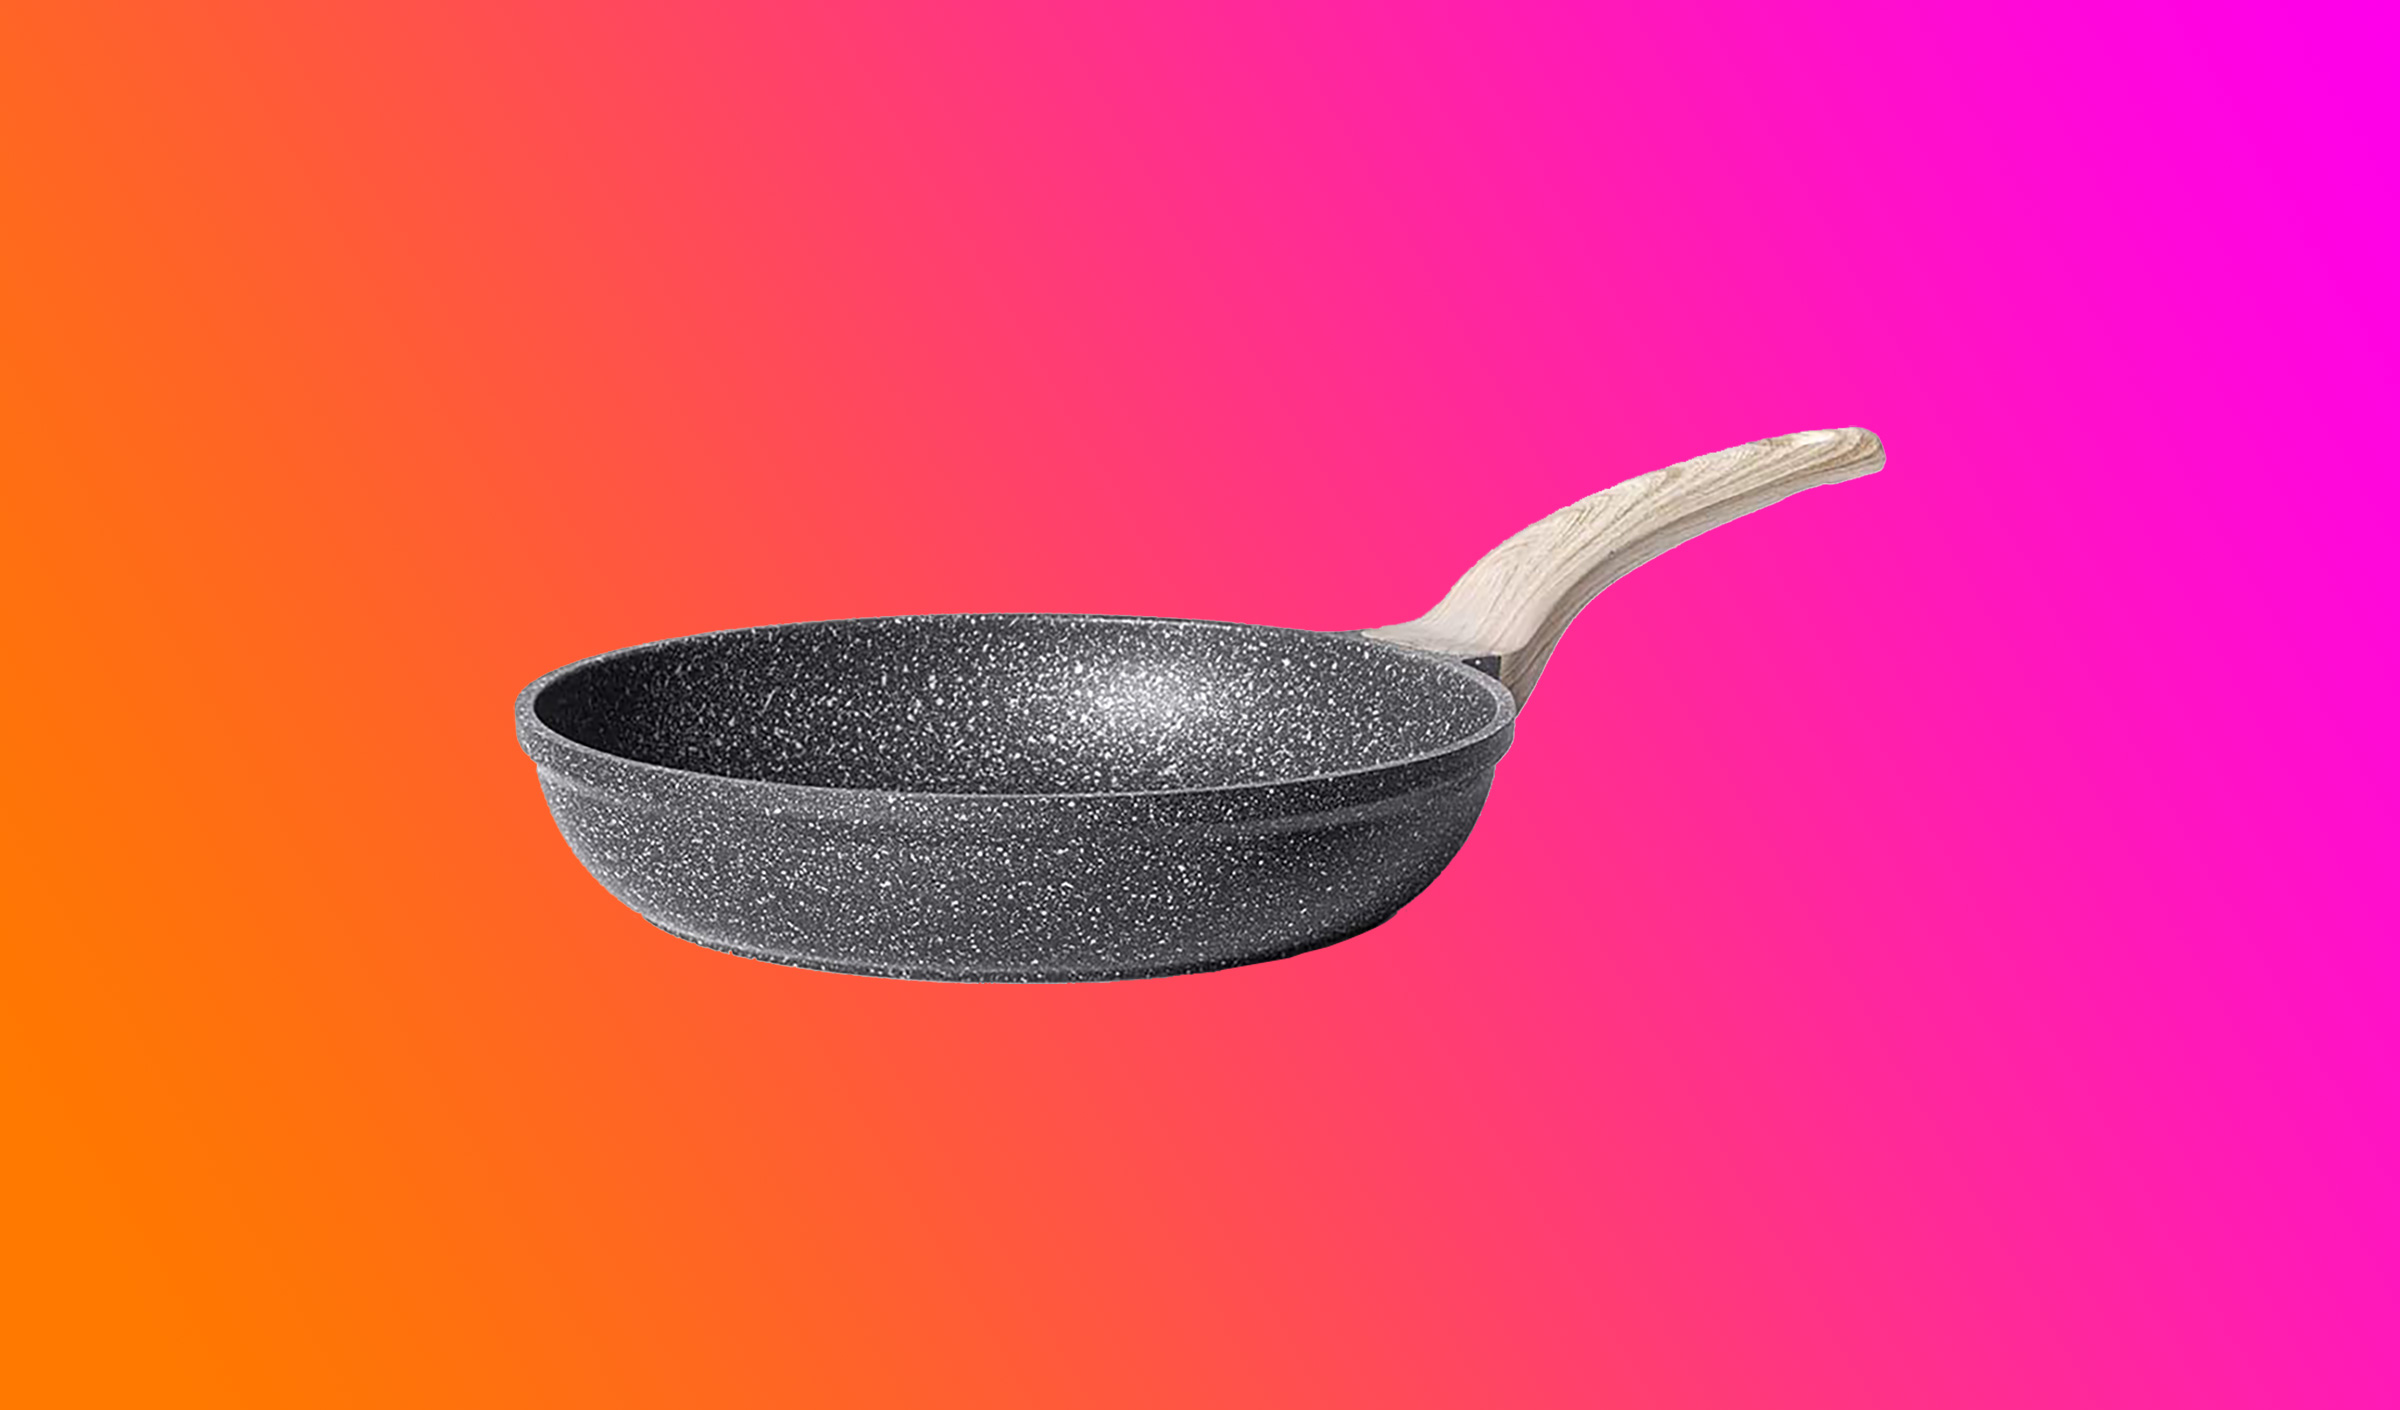 REVIEW Carote 10-Inch Nonstick Frying Pan Skillet,Stone Cookware